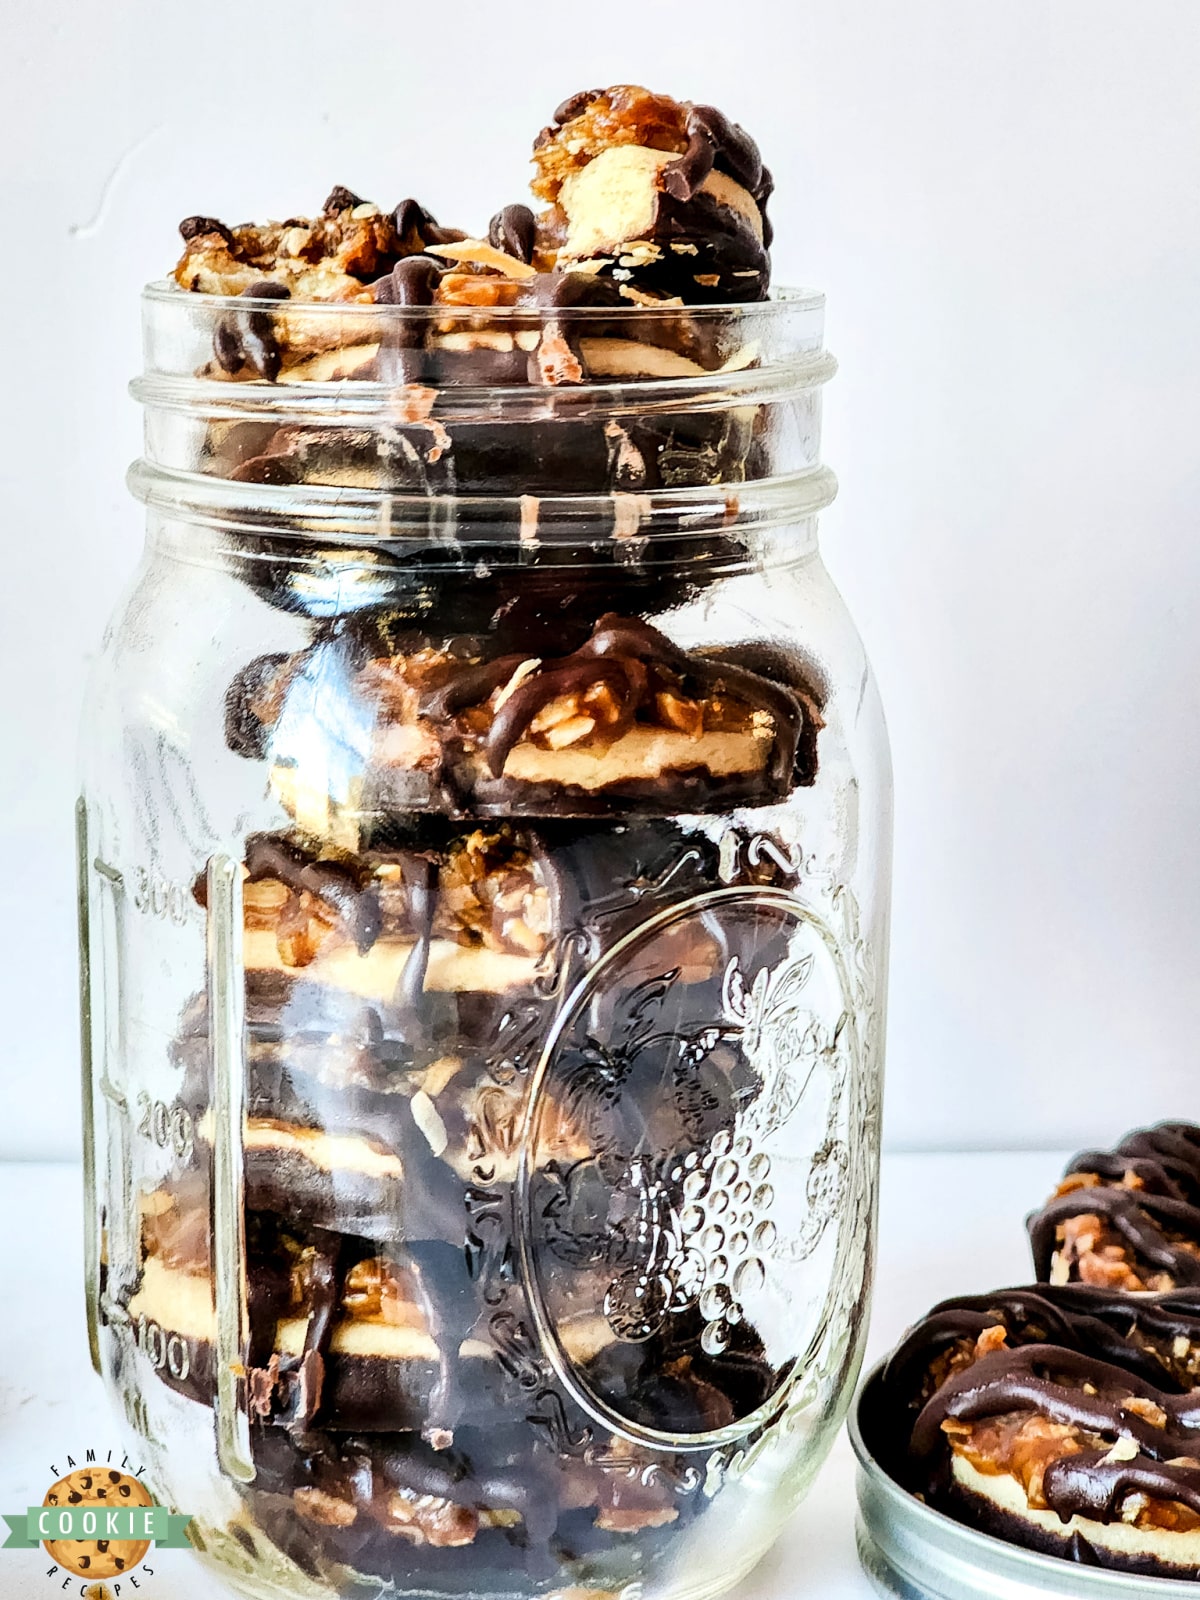 Shortbread cookies with chocolate, caramel and coconut